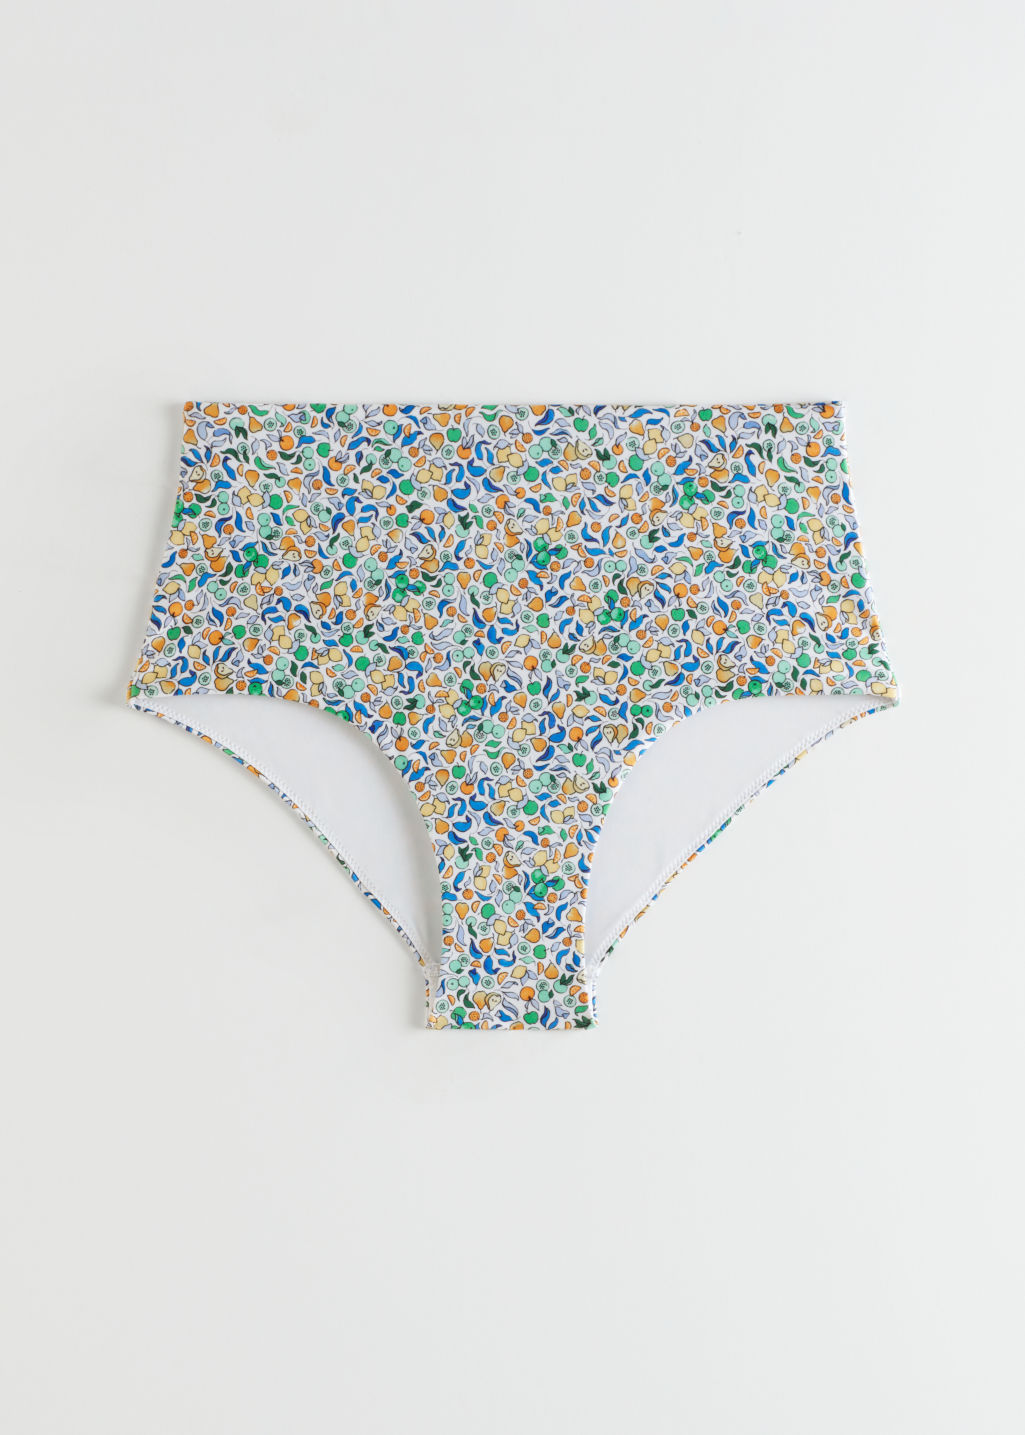 High Rise Bikini Bottom - Navy Floral - Bottoms - & Other Stories